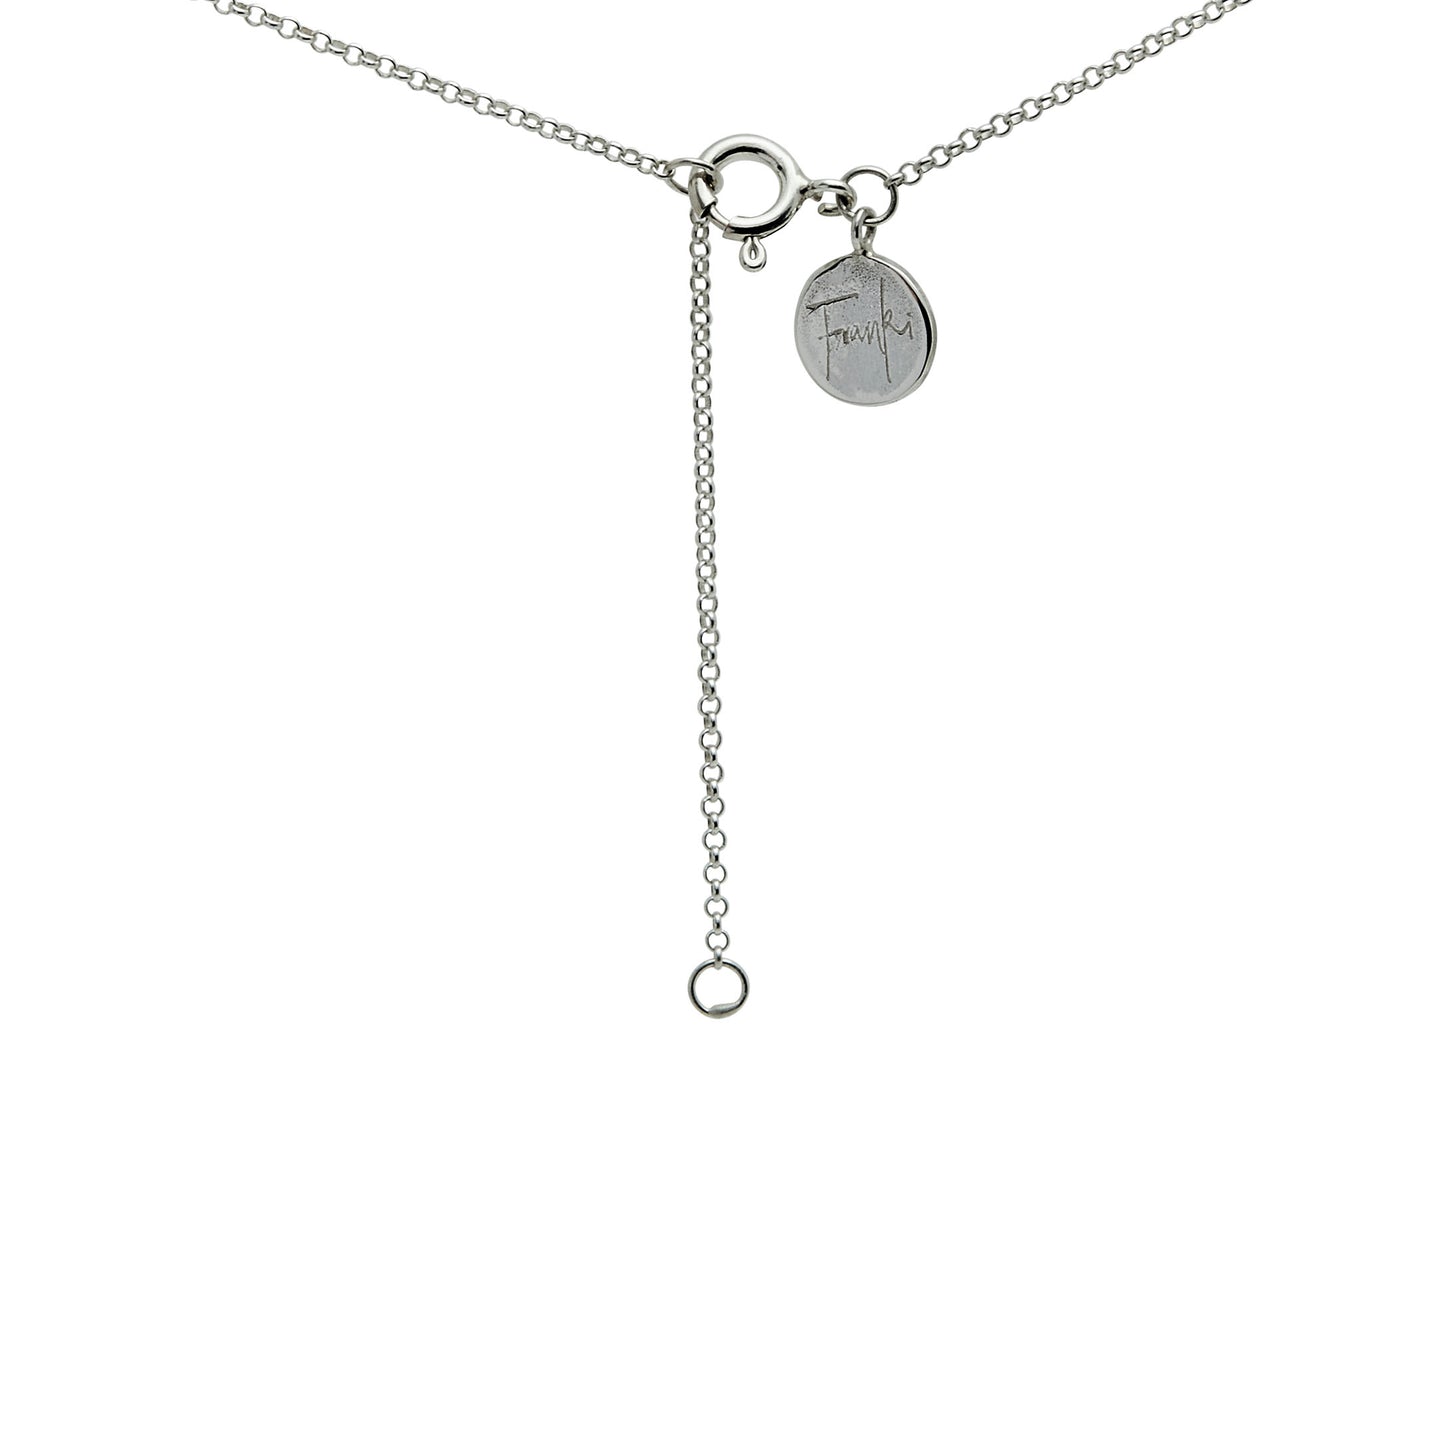 Silver 925 Shooting Star Tassle Necklace